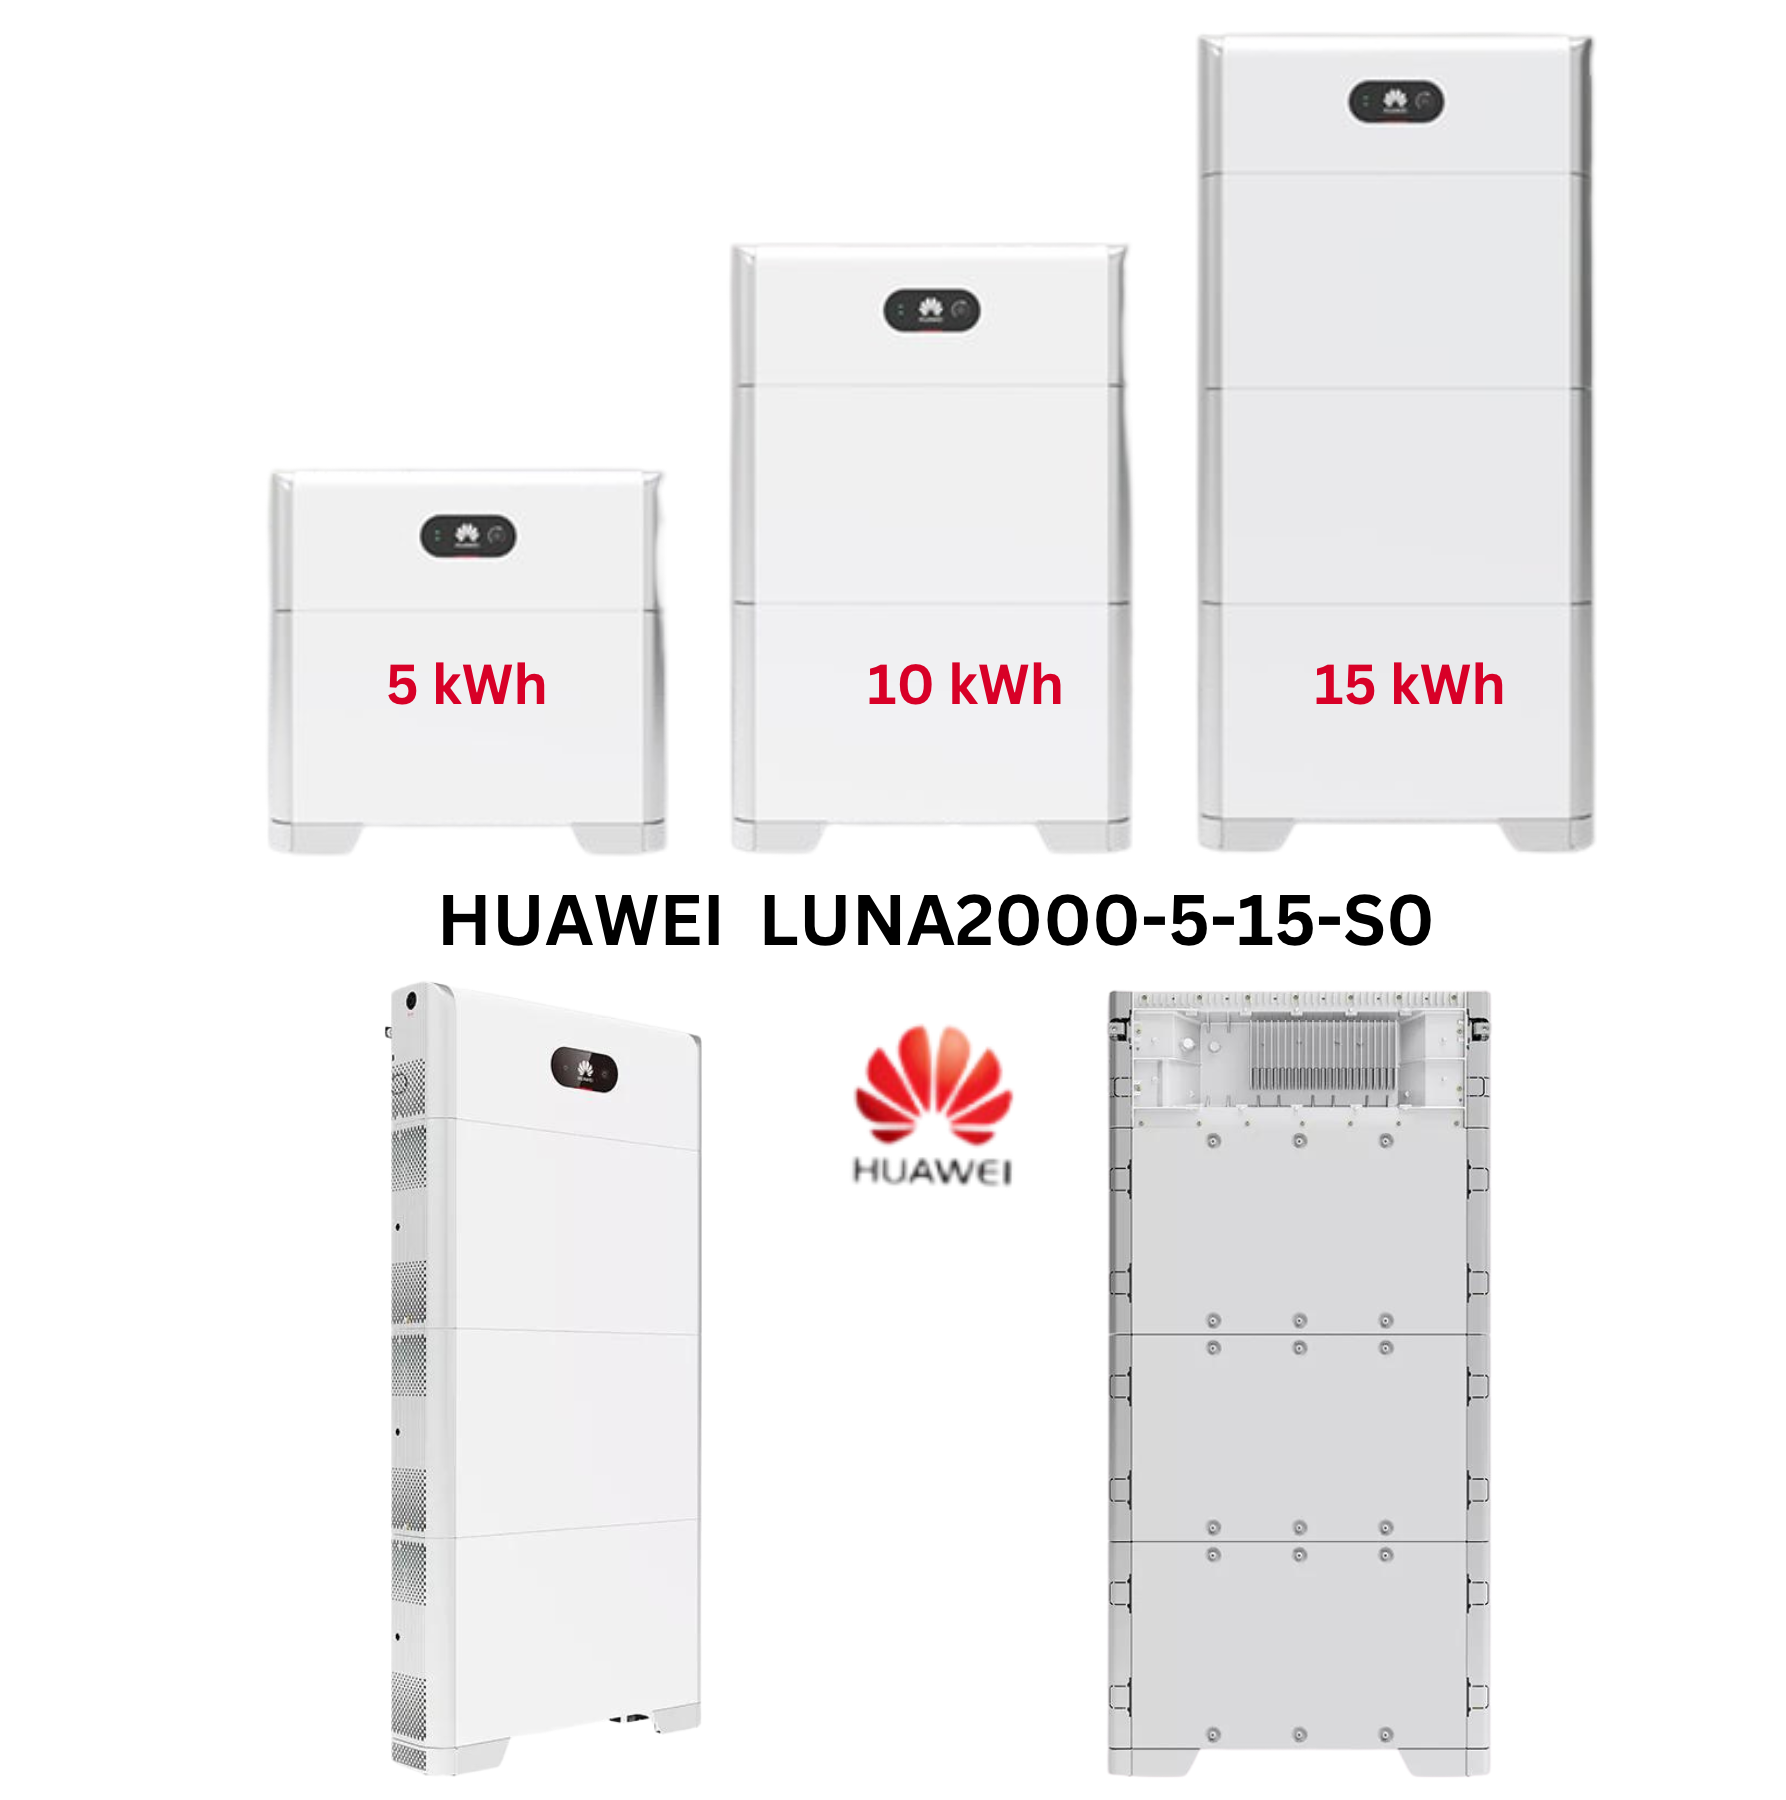 Huawei Ensemble Photovoltaïque Complet - [5kW + 10kWh]